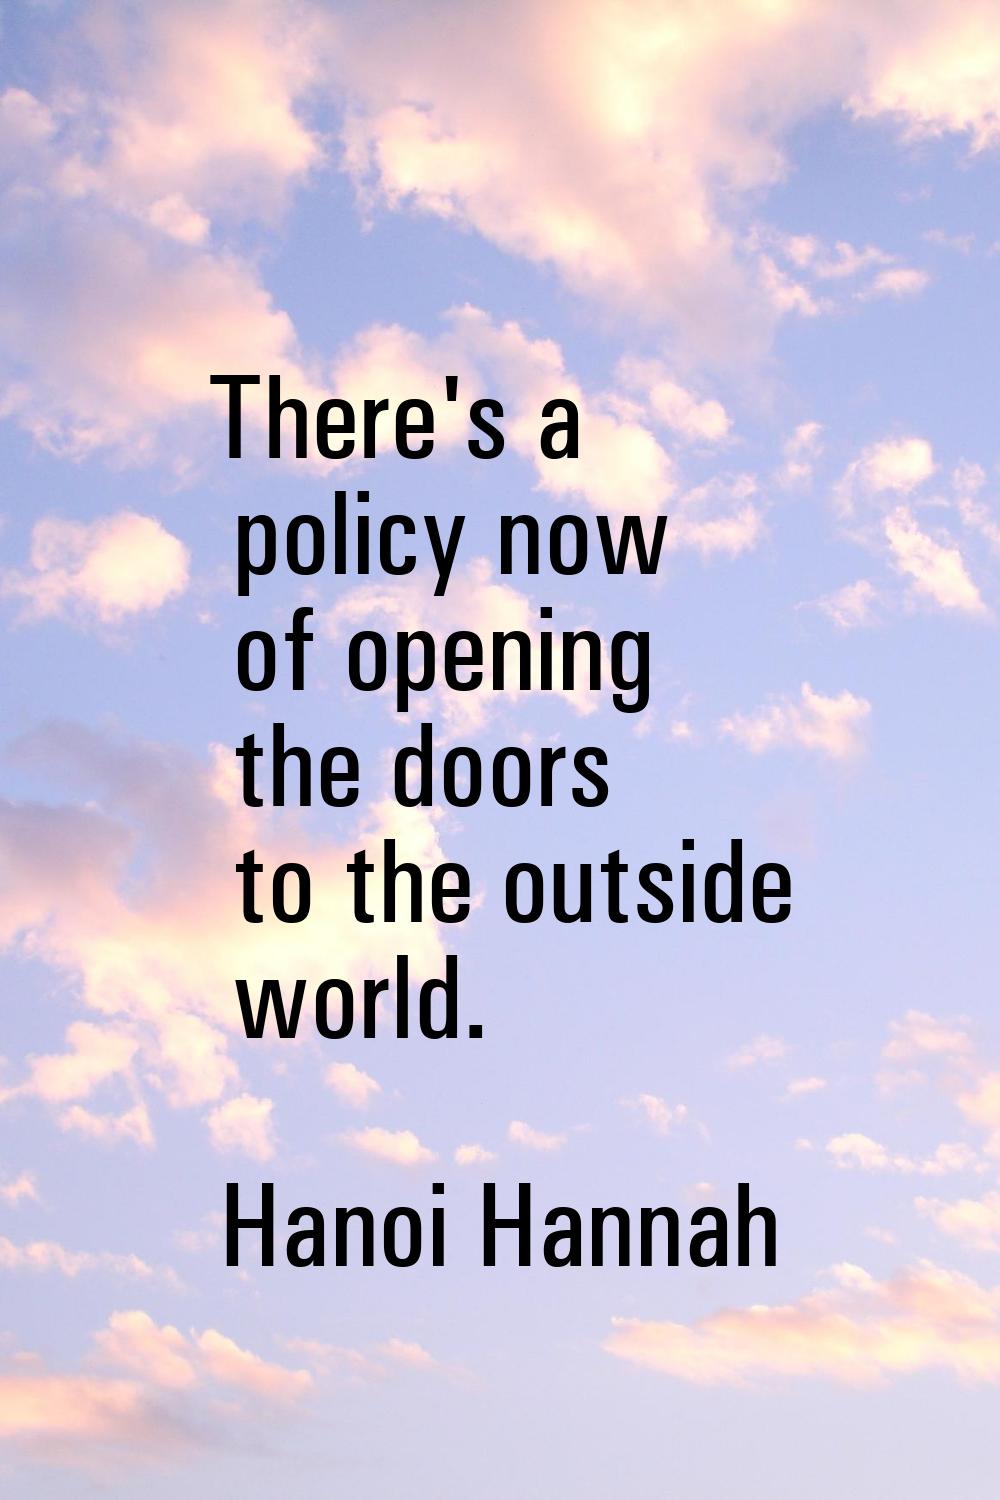 There's a policy now of opening the doors to the outside world.